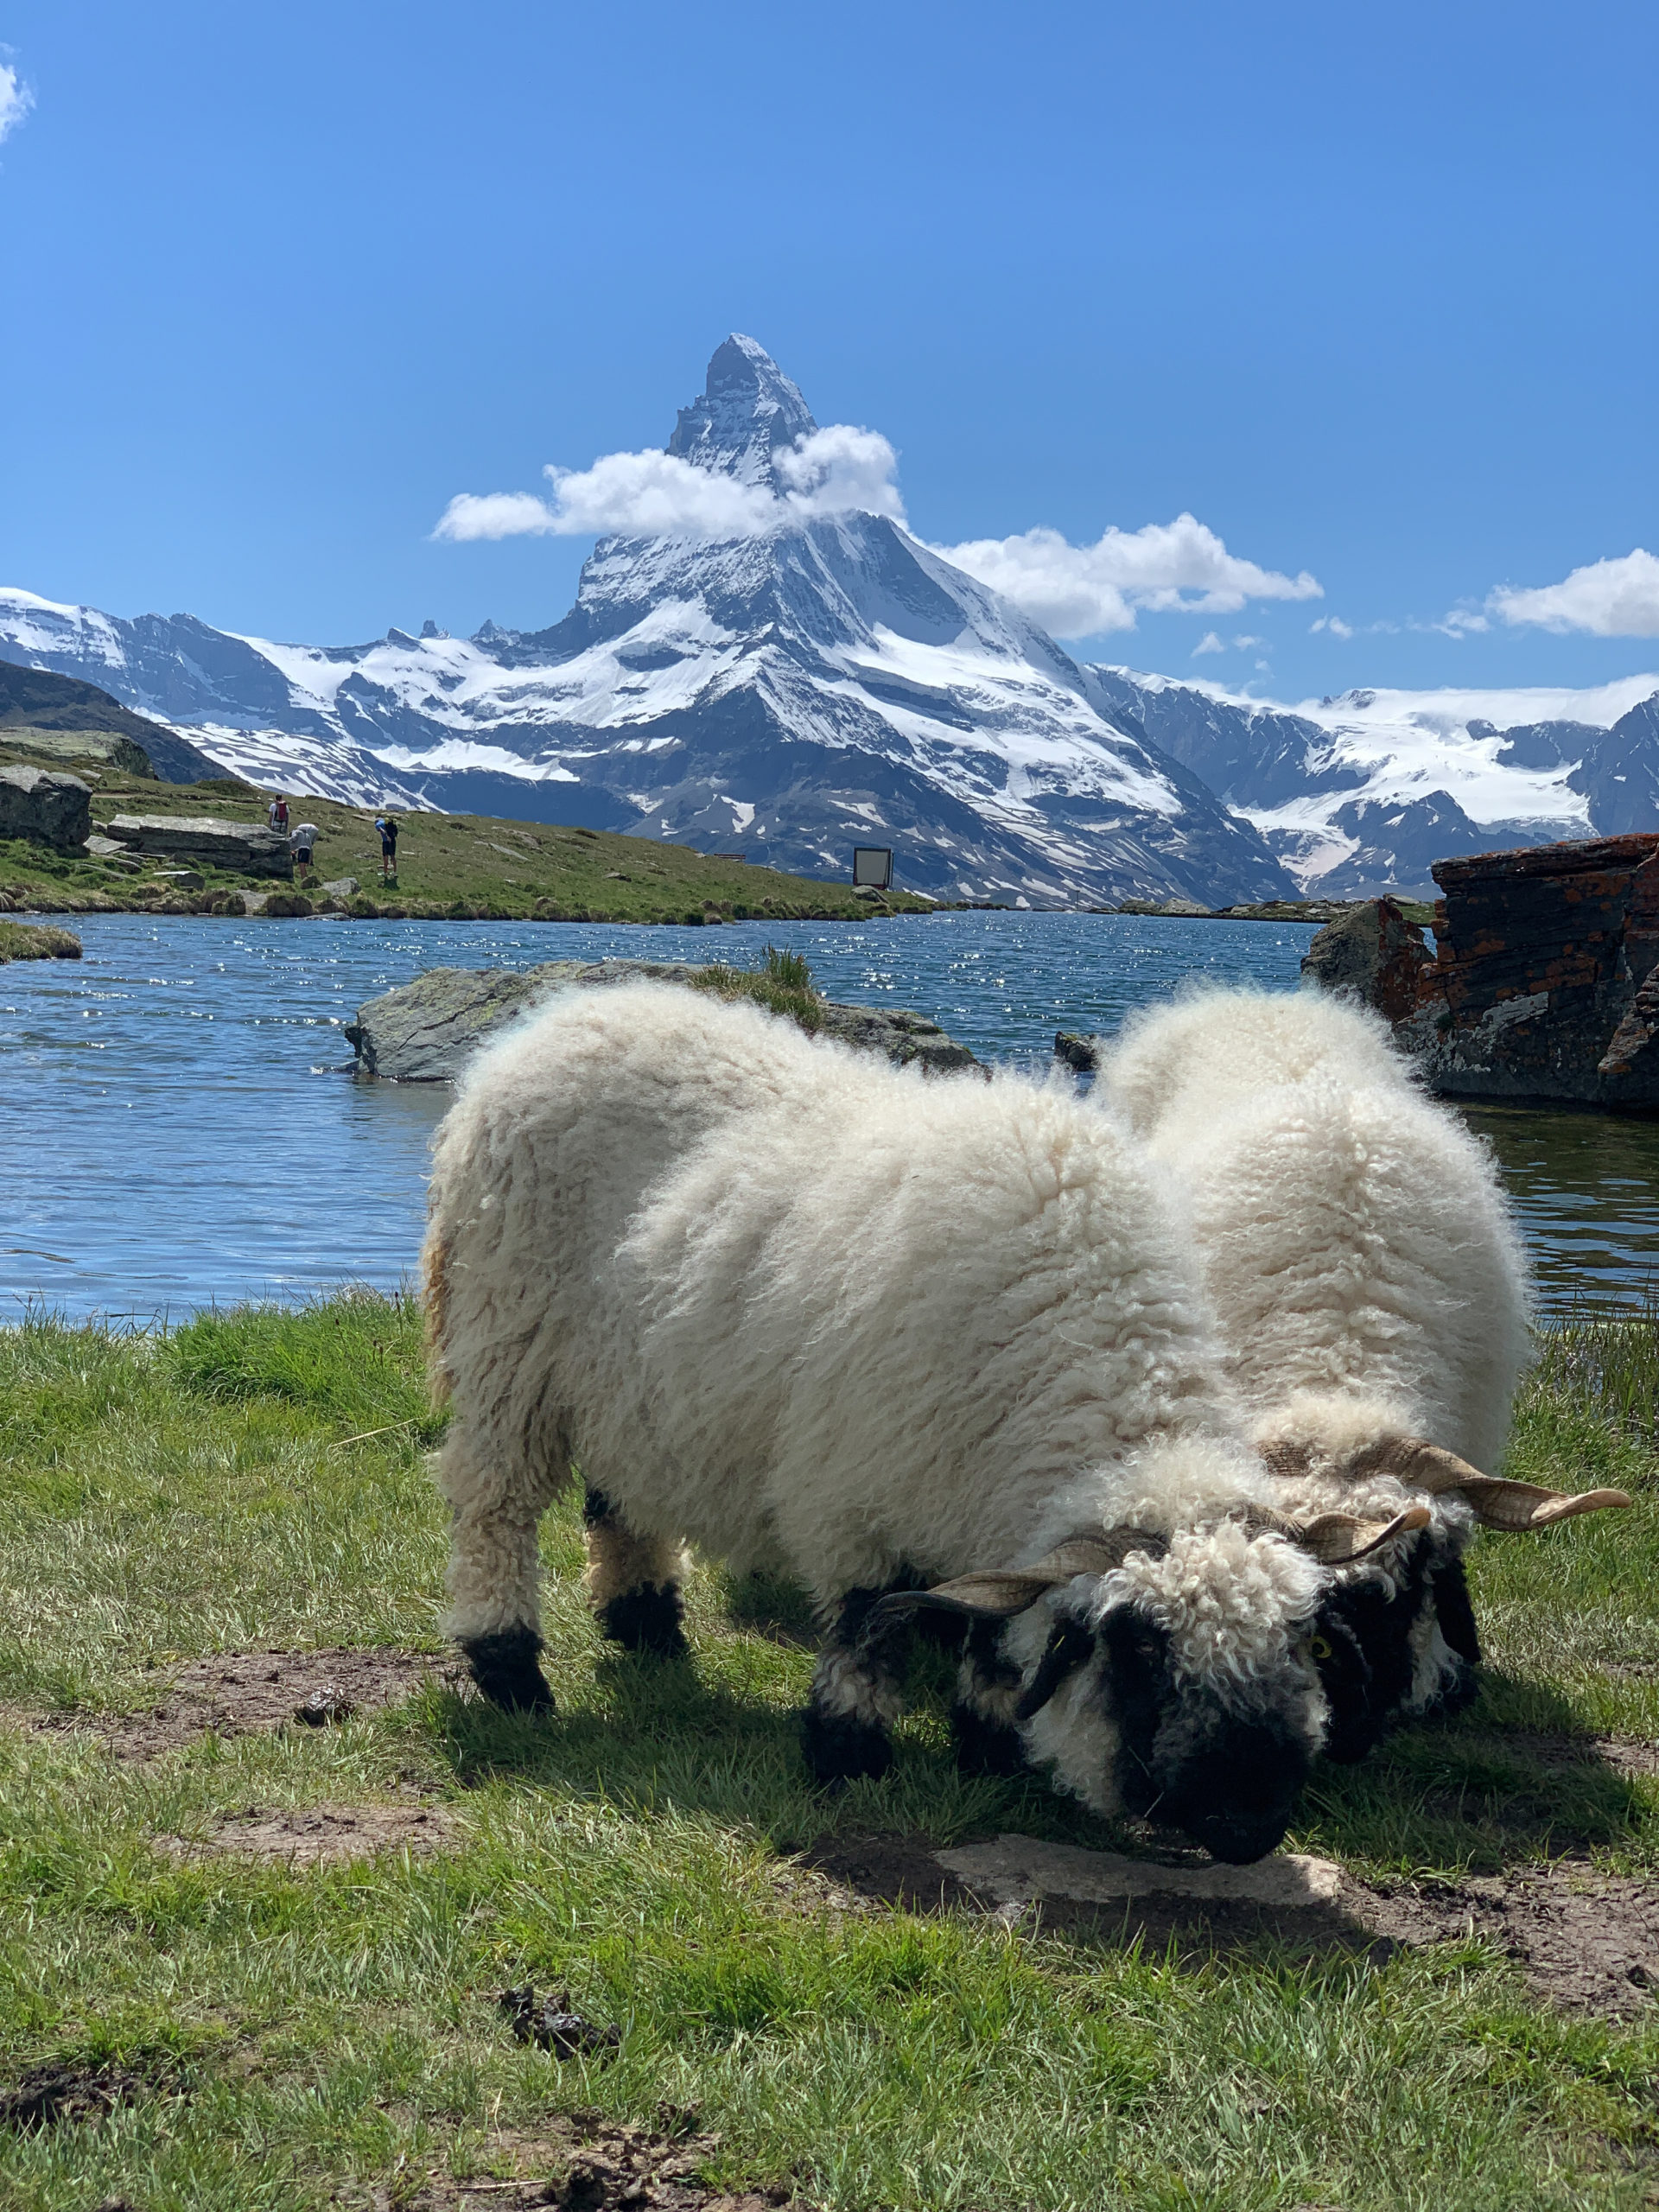 Sheeps eating grass in front of a lake with the Matterhorn behind in Zermatt